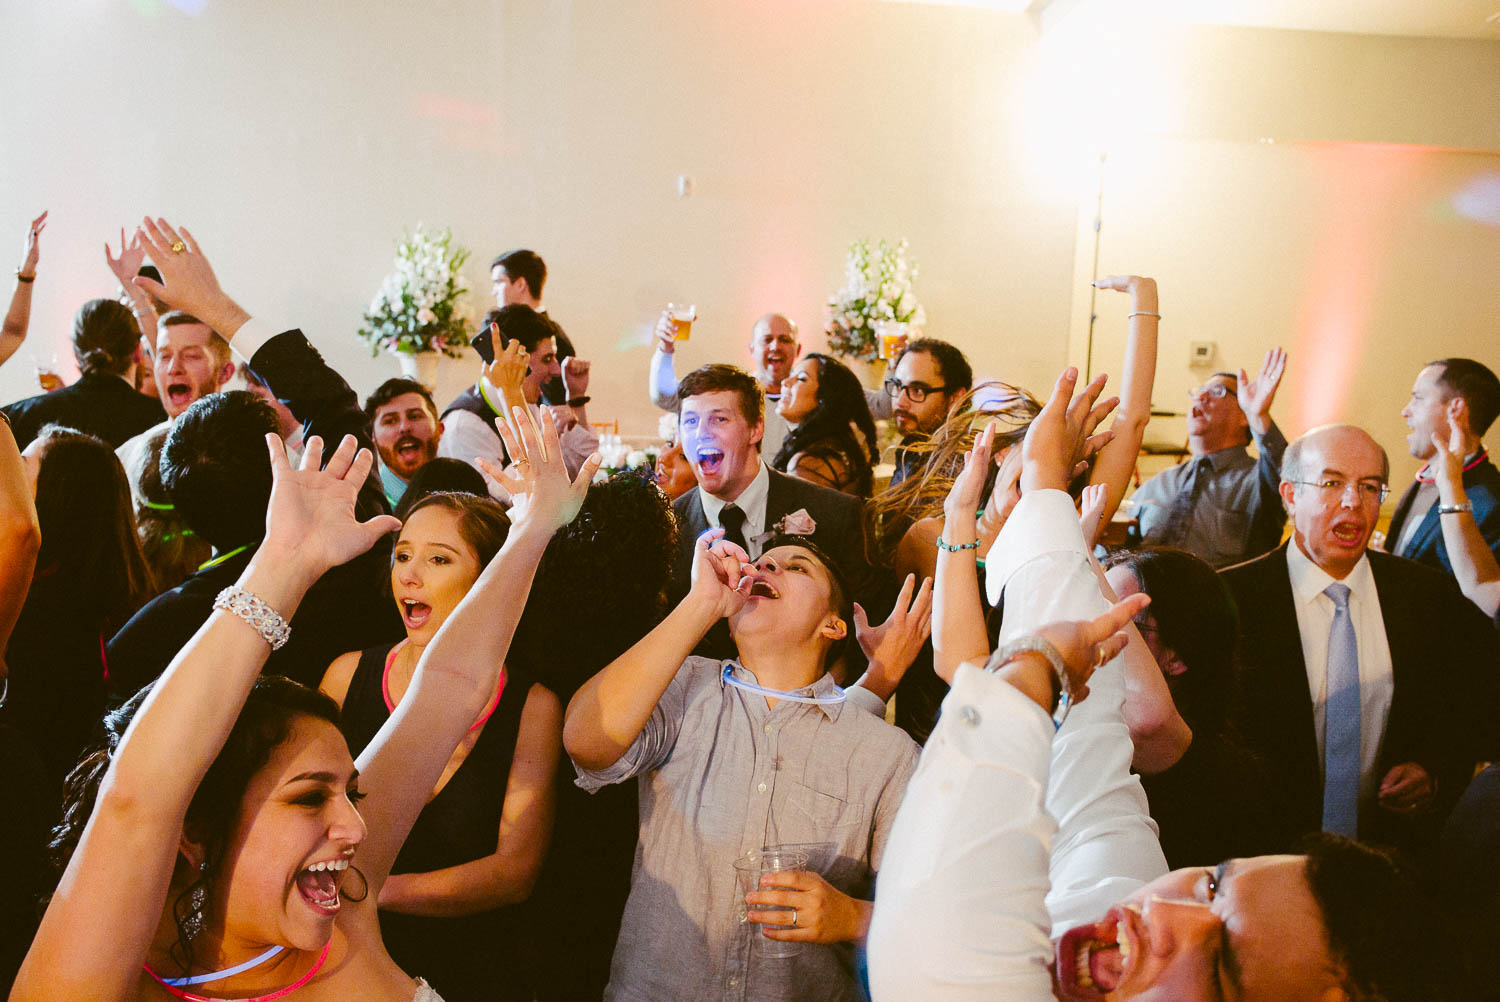 Guests shout out in unison at wedding reception Granberry Hills Wedding, Philip Thomas Photography